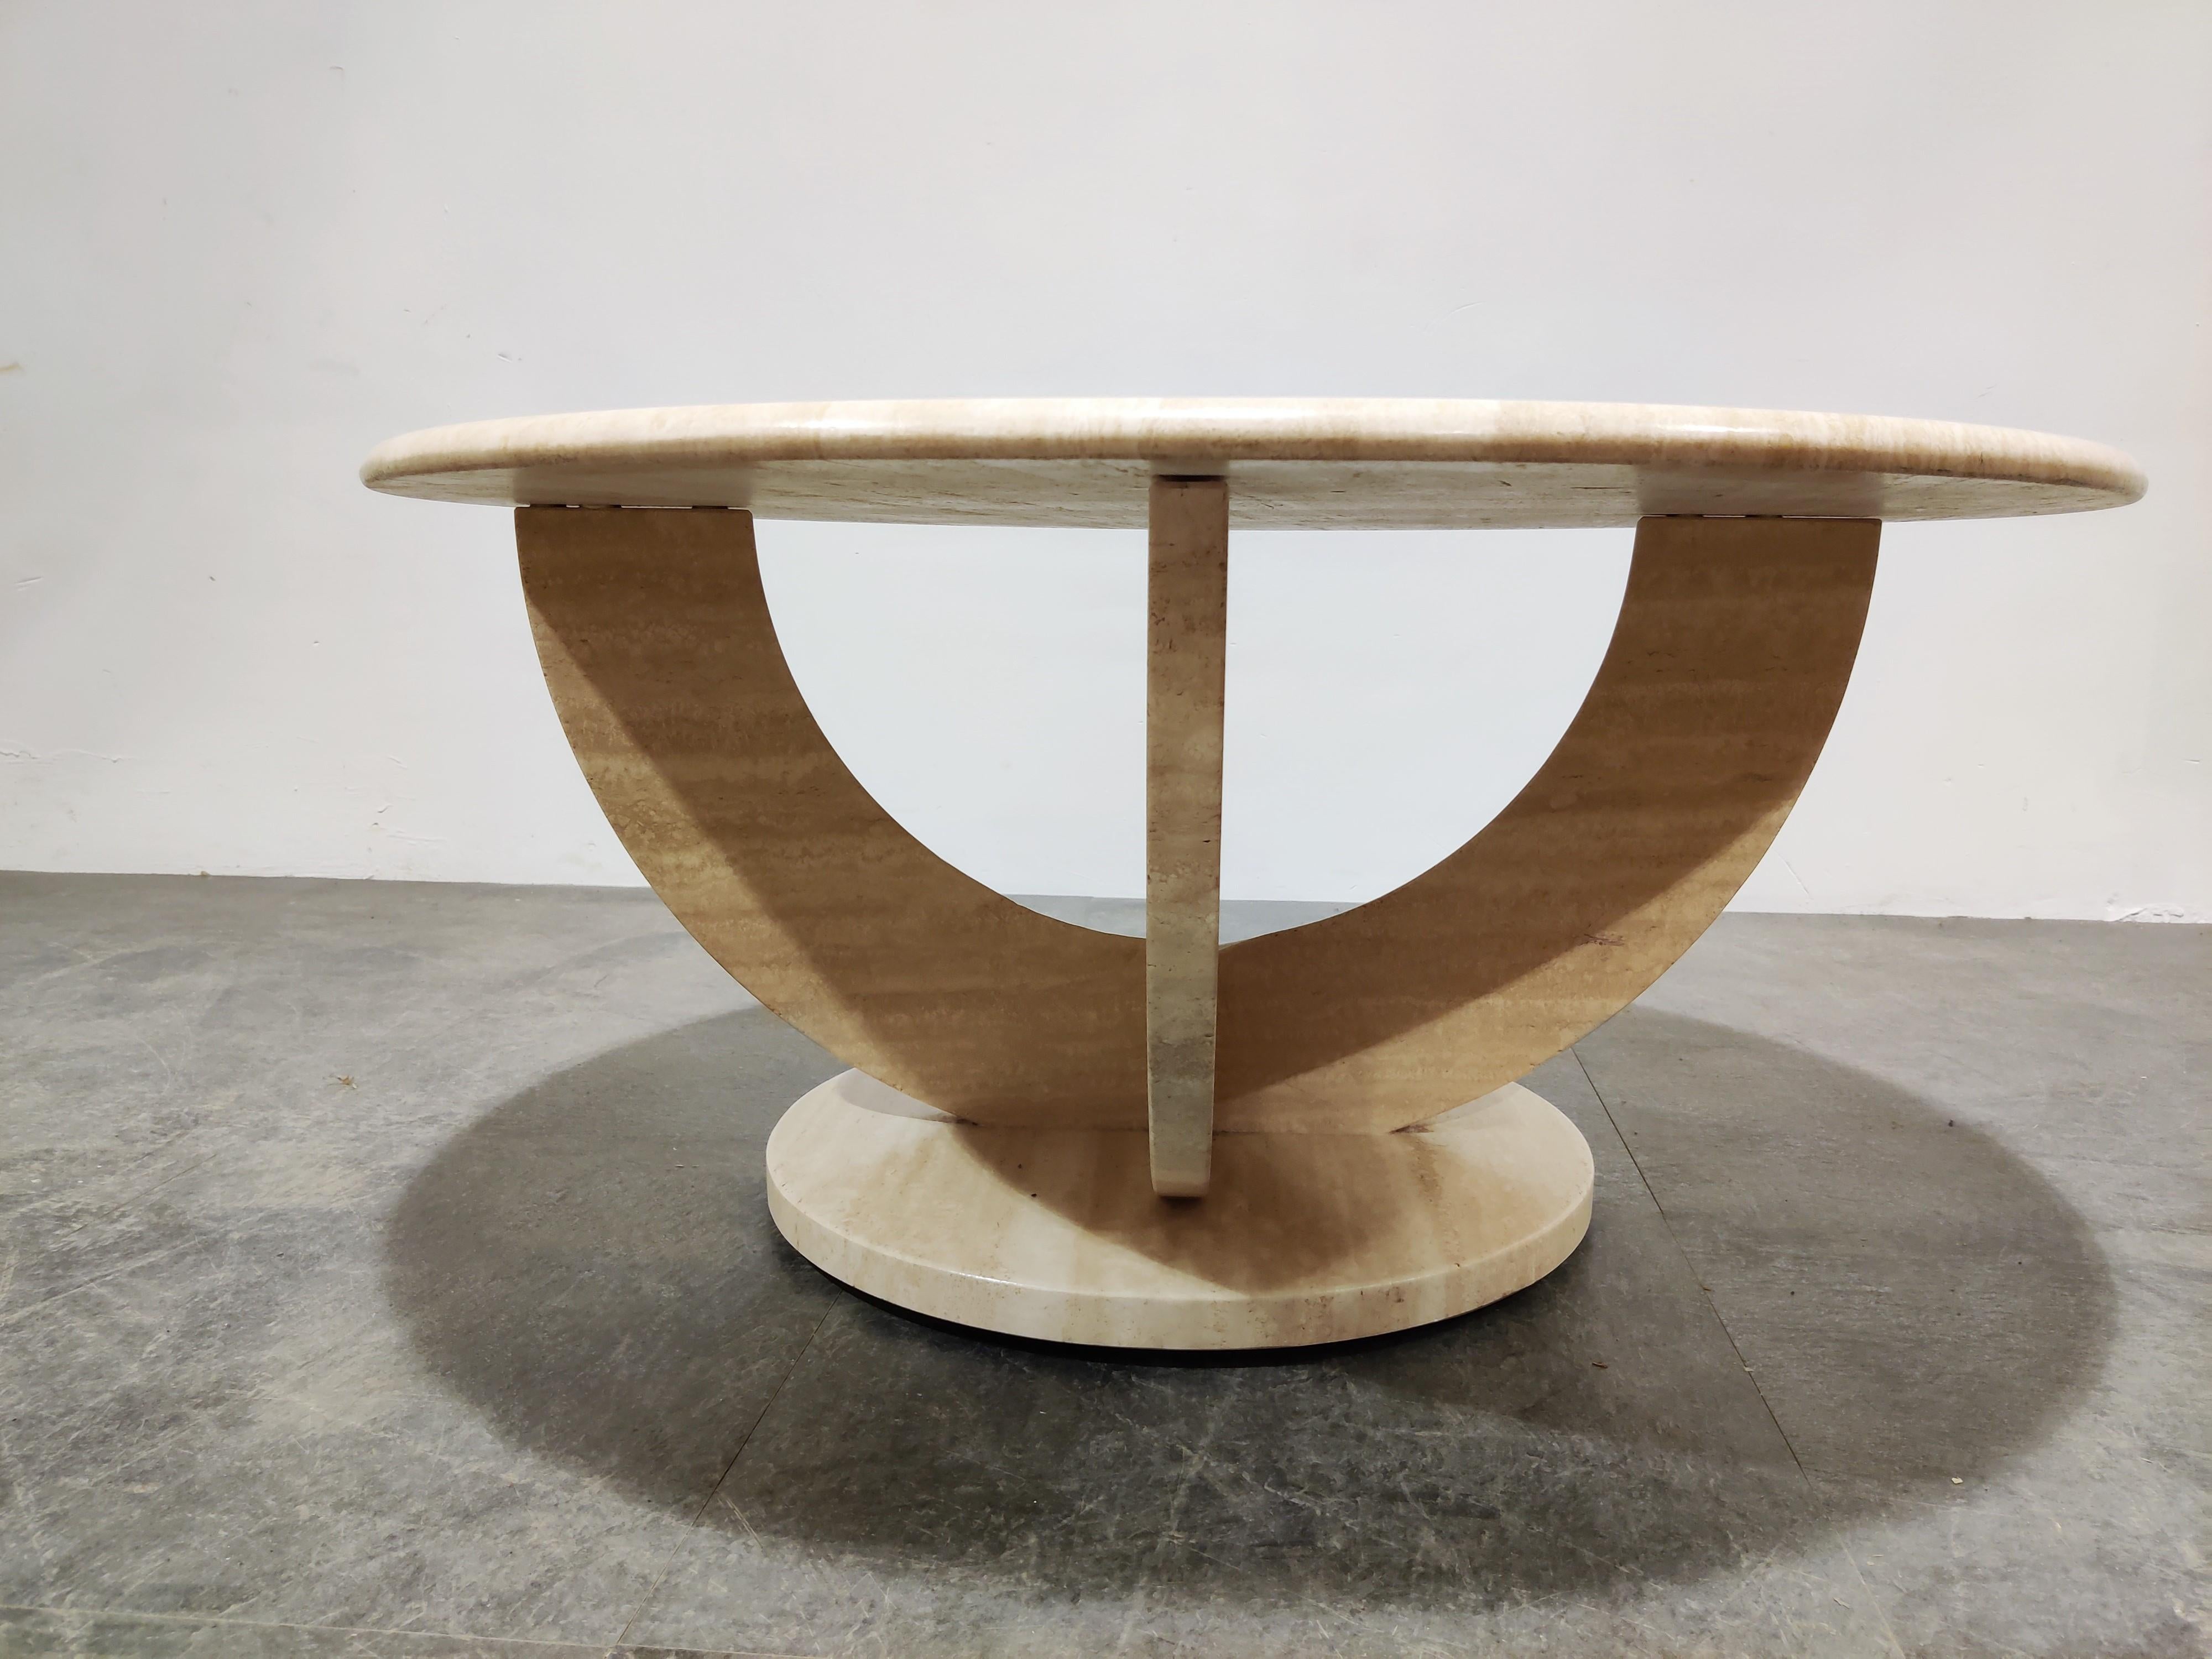 Vintage round travertine coffee table with a nicely shaped base.

The round top has been nicely finished. 

Good condition.

1970s, Italy

Dimensions:
Height 43cm/16.92